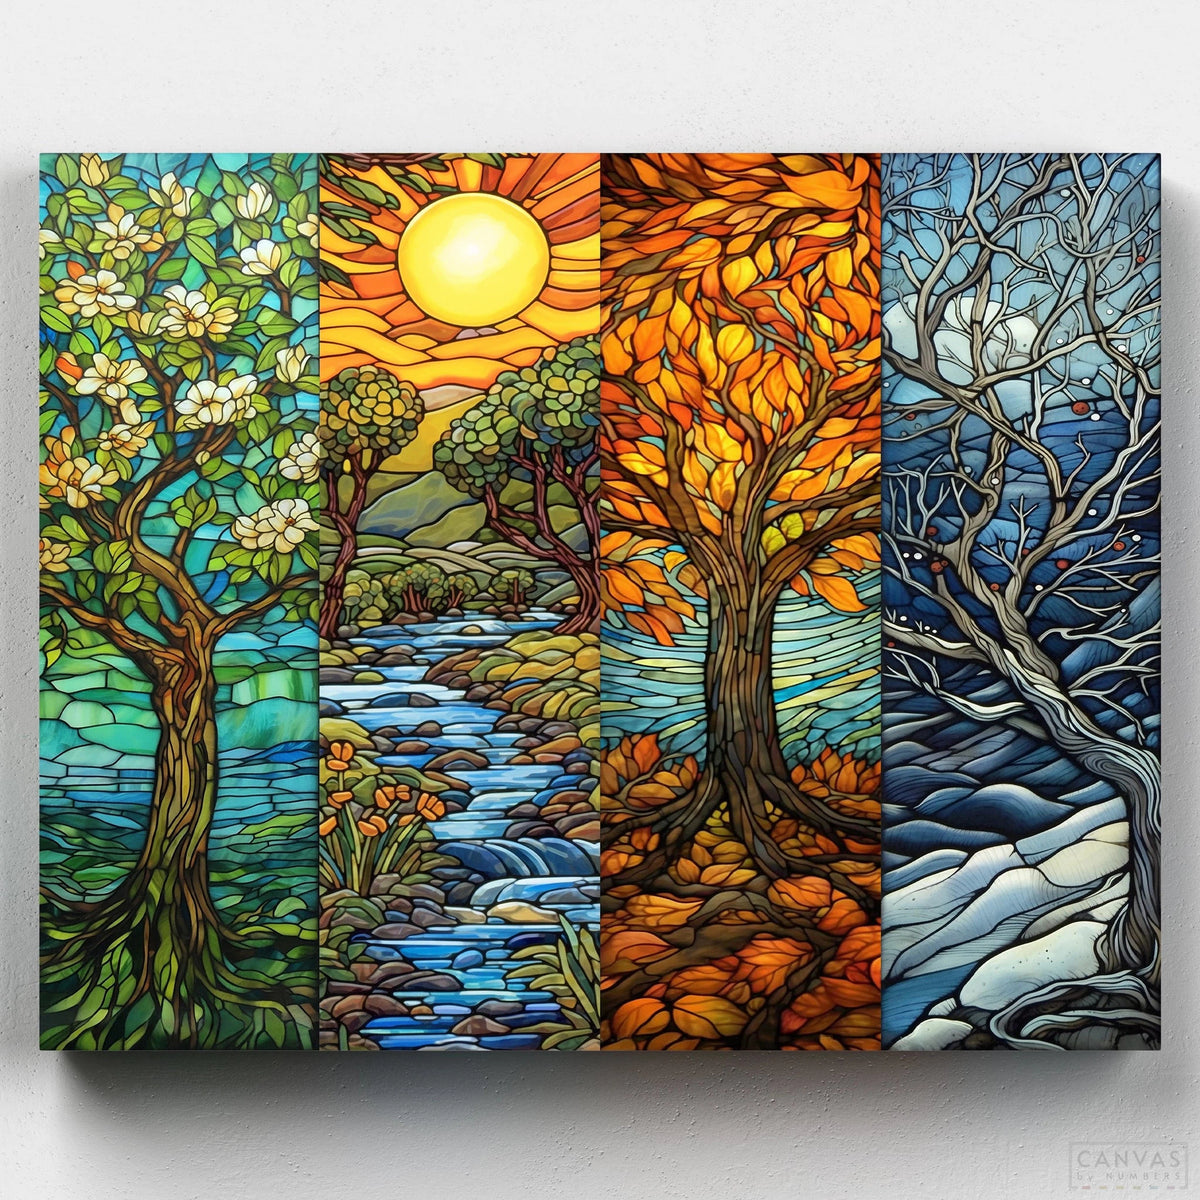 The Four Seasons - Paint by Numbers-Create a stunning stained glass scene with our Four Seasons Paint by Numbers Kit. Each panel represents spring, summer, fall, and winter in vibrant colors.-Canvas by Numbers